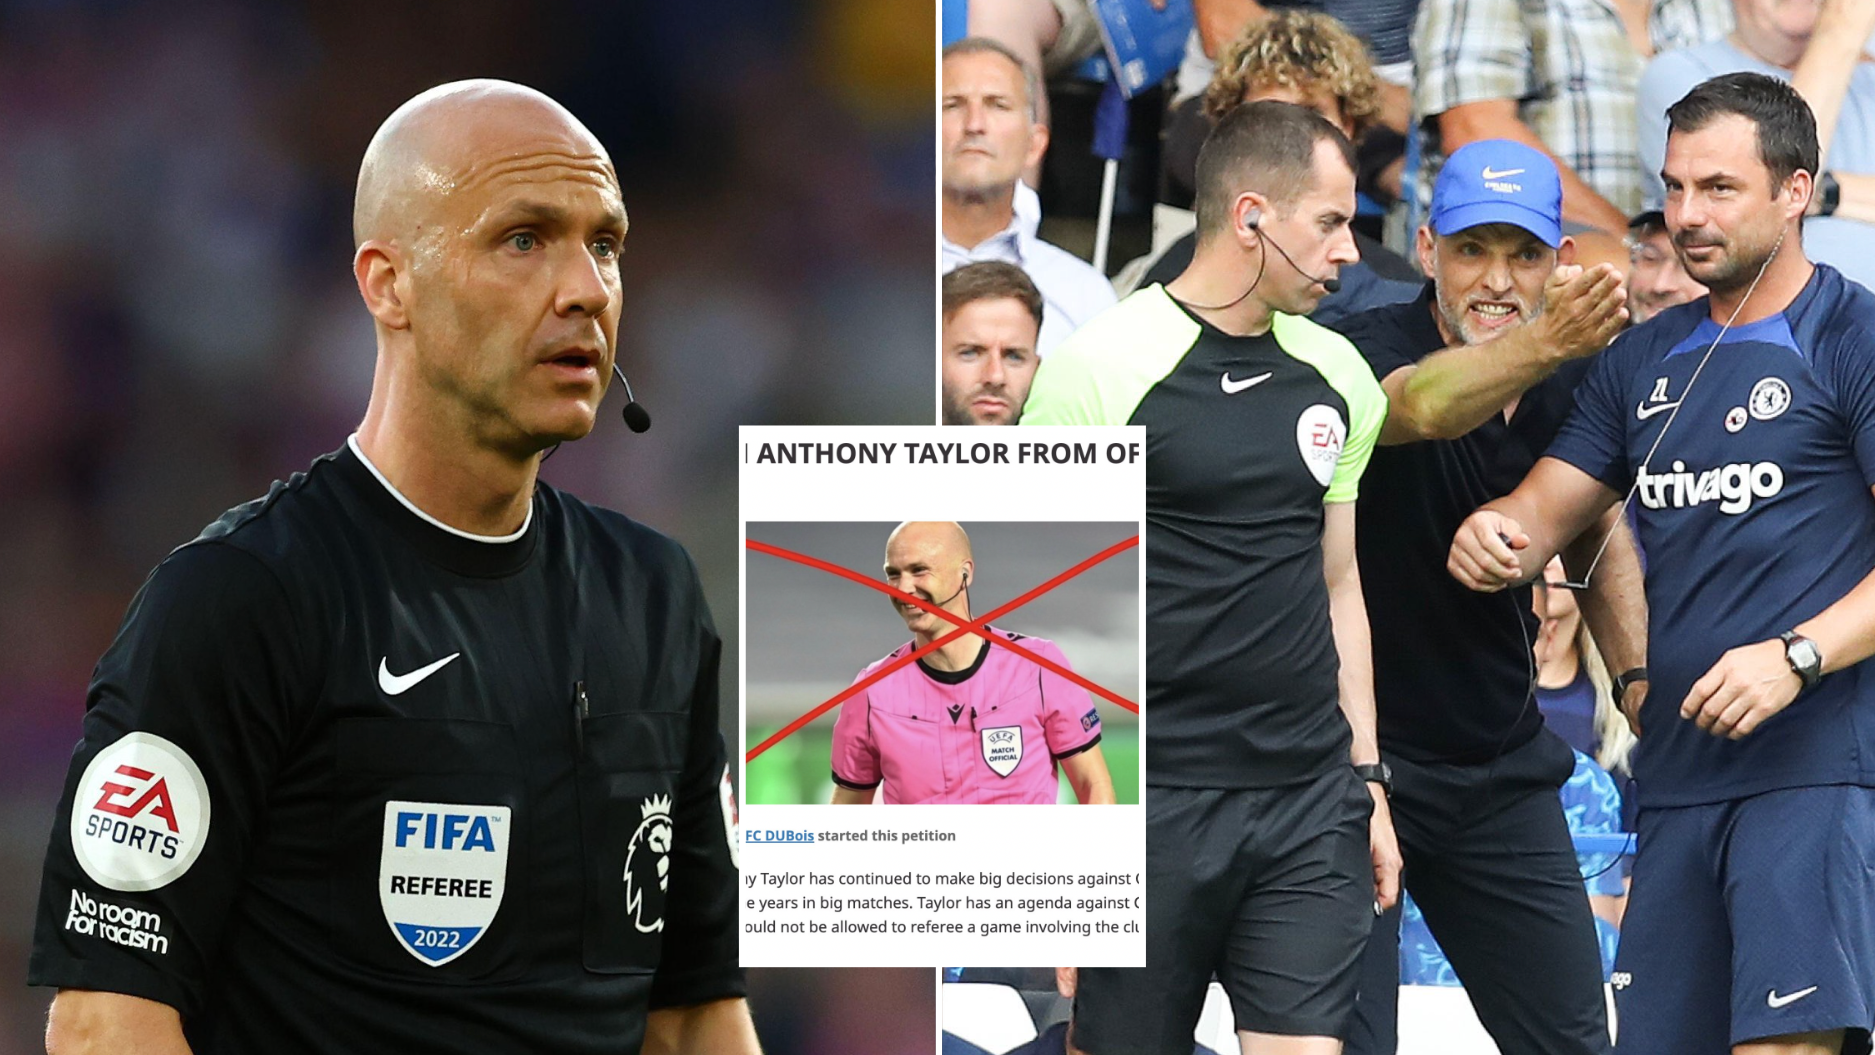 Anthony Taylor S Errors In Chelsea Vs Tottenham Hotspur Lead To 40 000 Fans Signing Petition